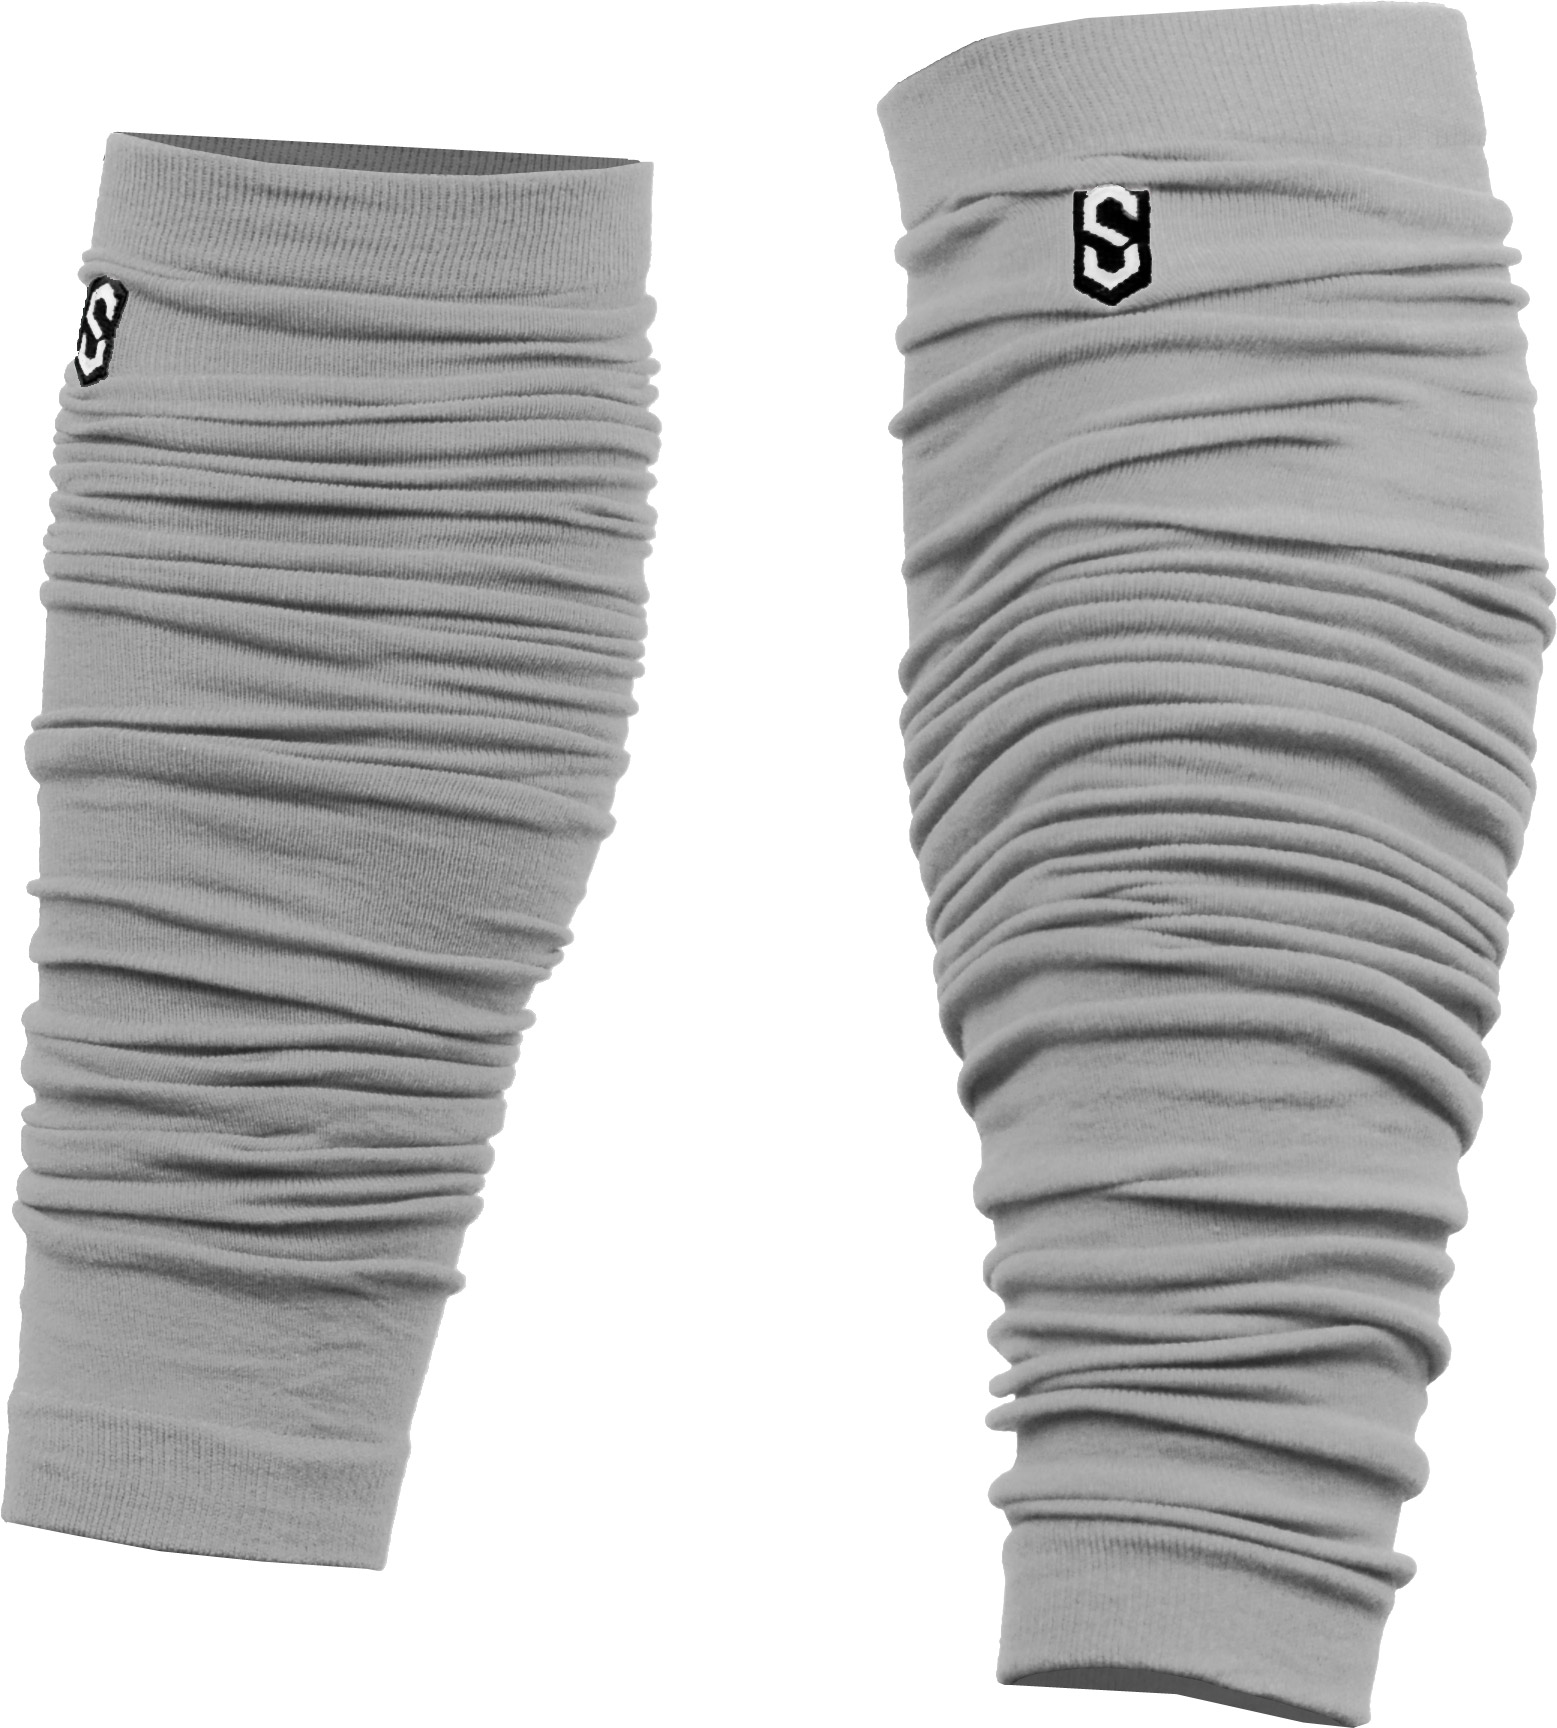 Football Leg Sleeves [1 Pair] - For Adult & Youth - Calf Compression  Sleeves for Men and Boys - White